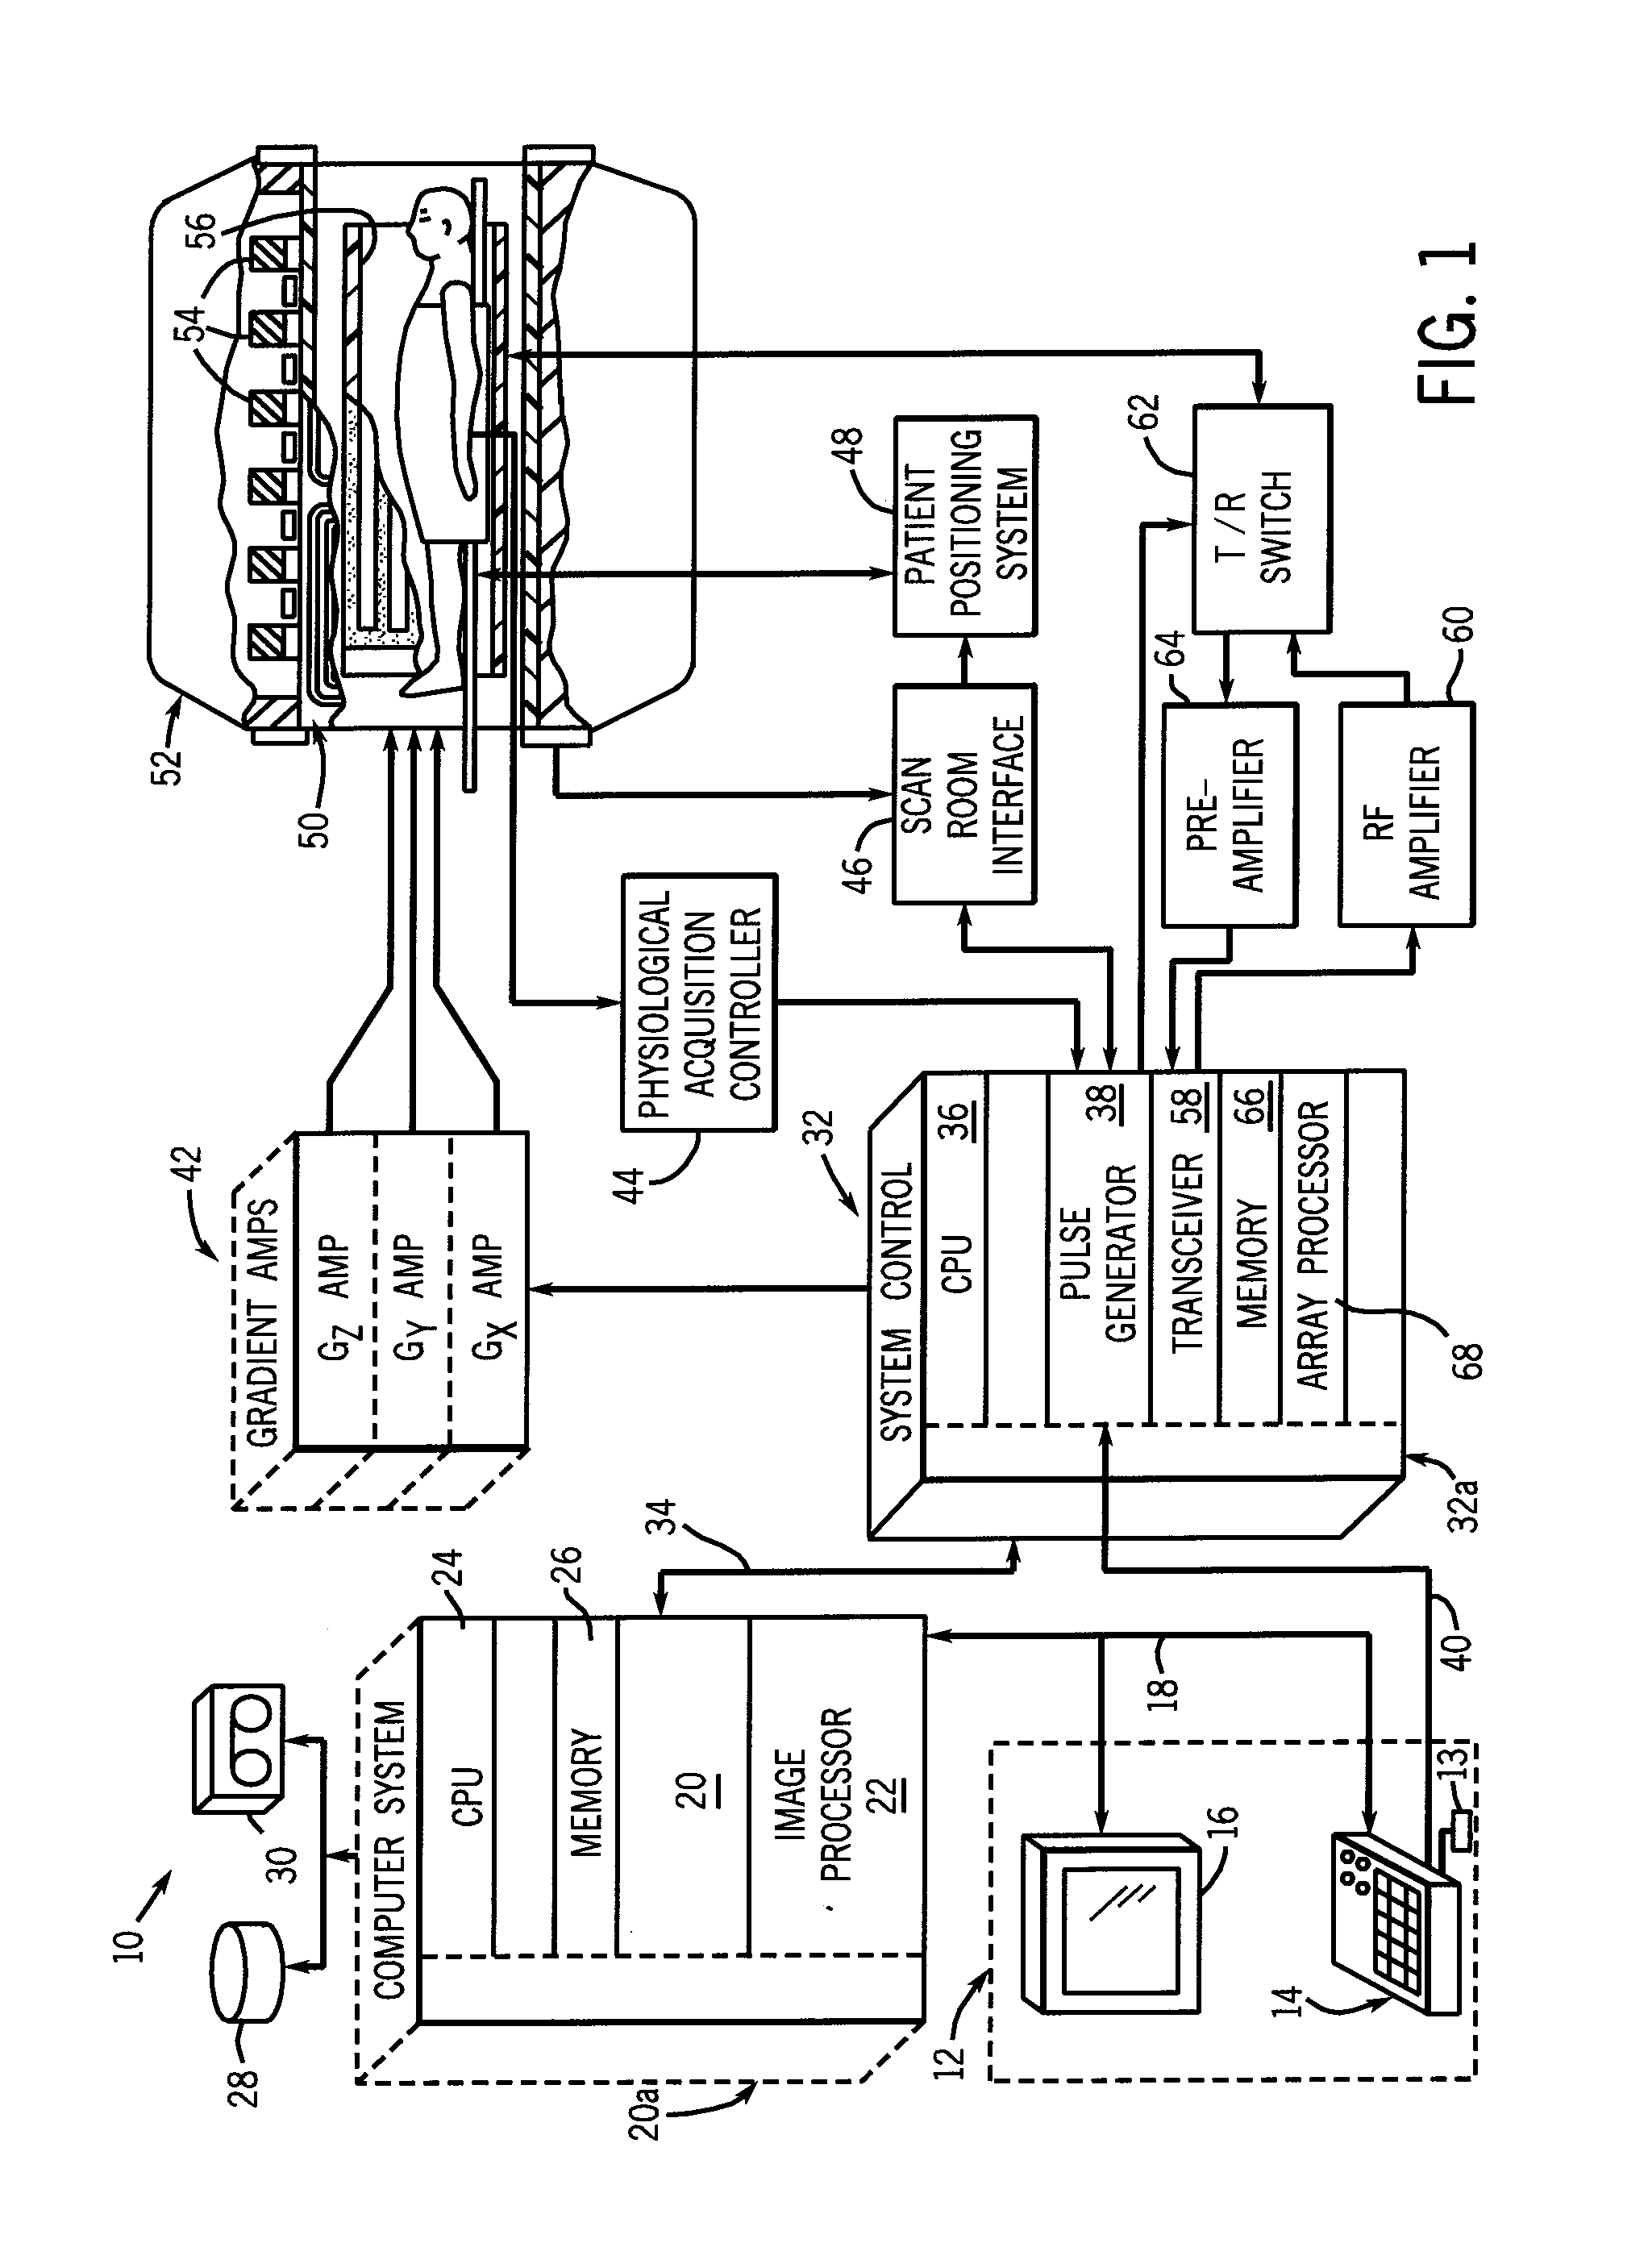 Integrated low noise amplifier and balun for MRI receivers